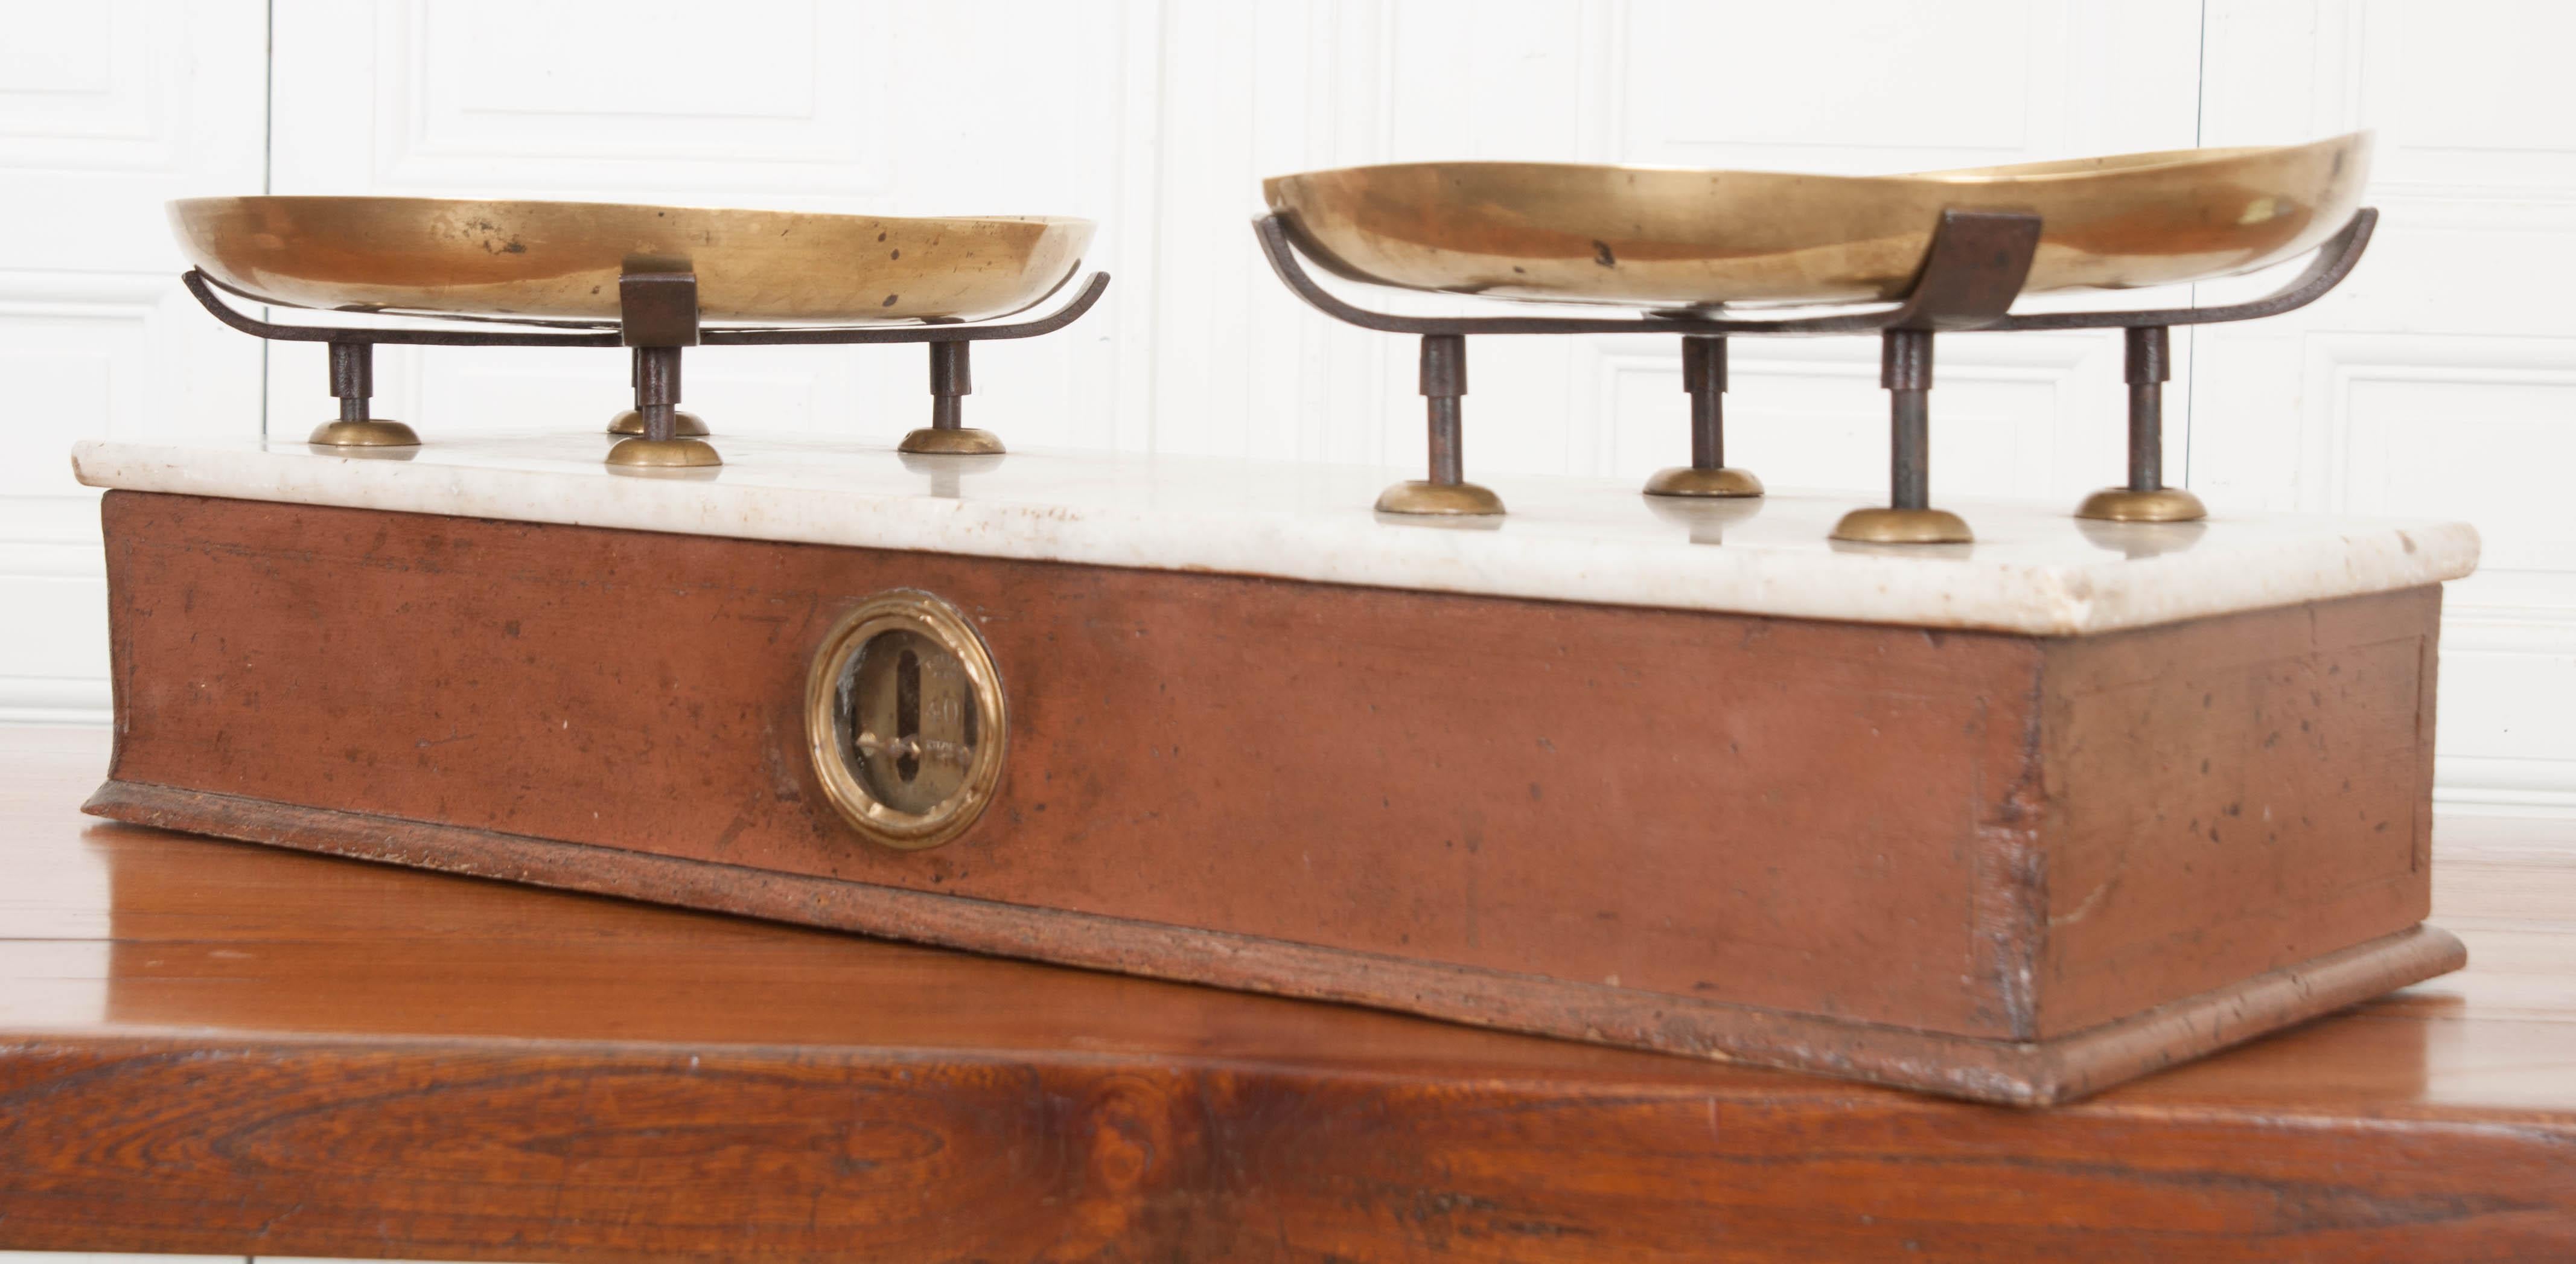 A large kitchen / culinary scale made in Lyon, France, circa 1880. This wonderful antique instrument was used to measure various ingredients and products that are epicurean in nature. Its sizable brass plates each contain a multitude of stamps that